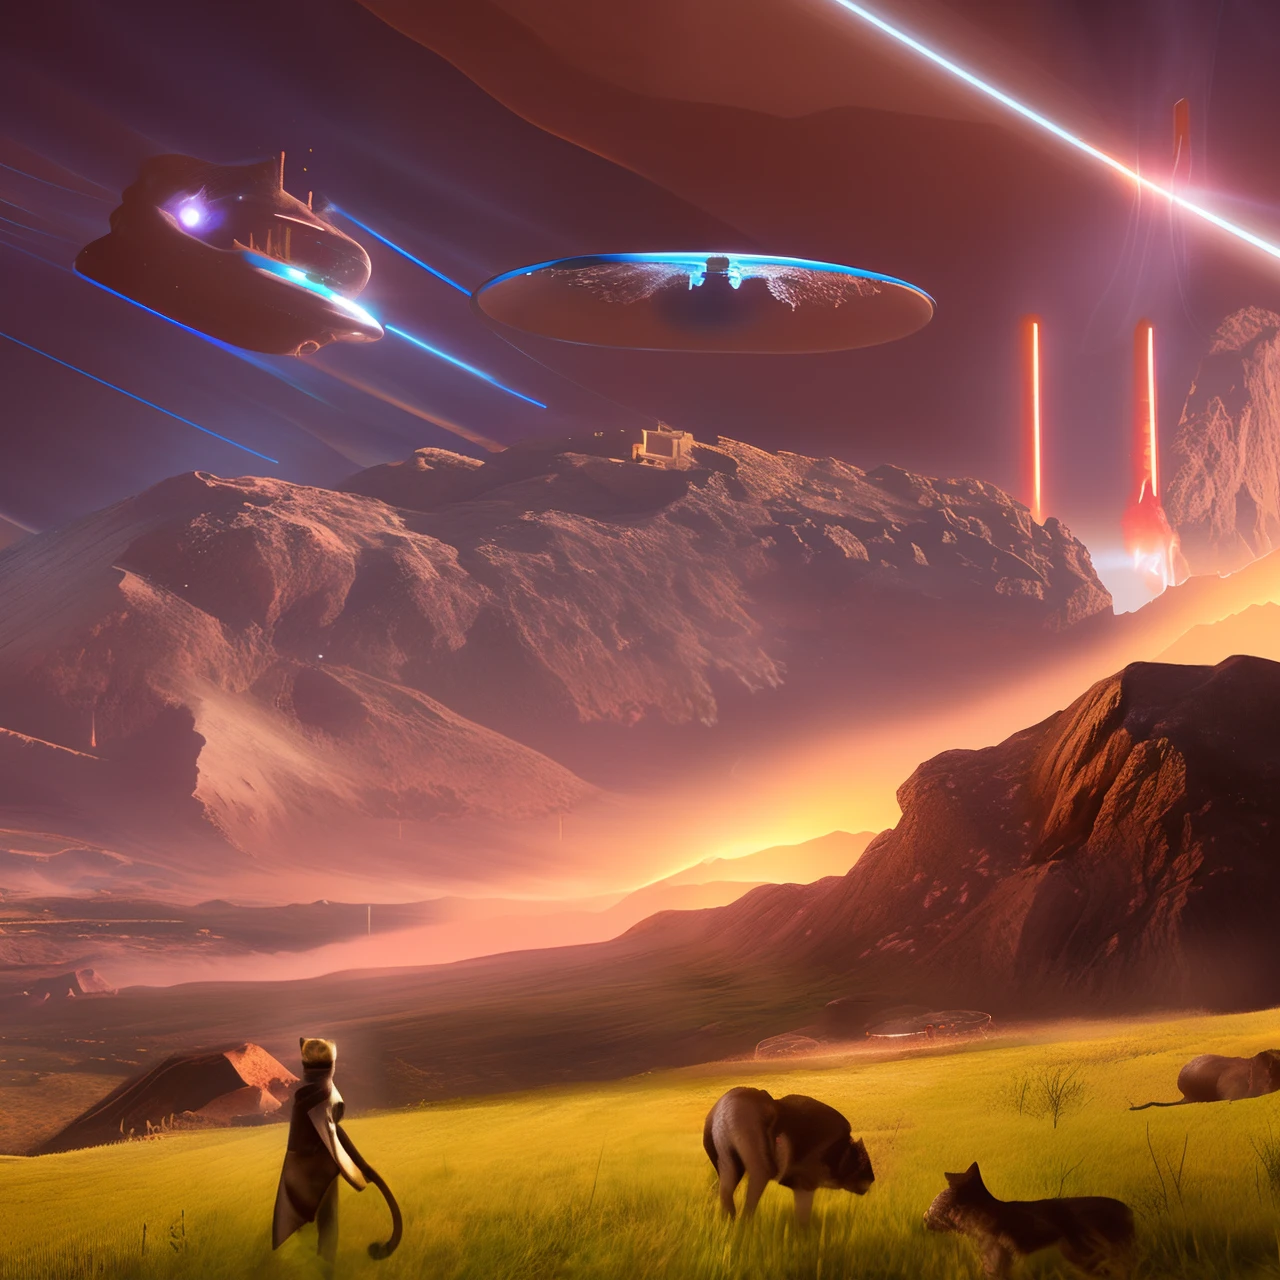 Sci-fi landscape with cats